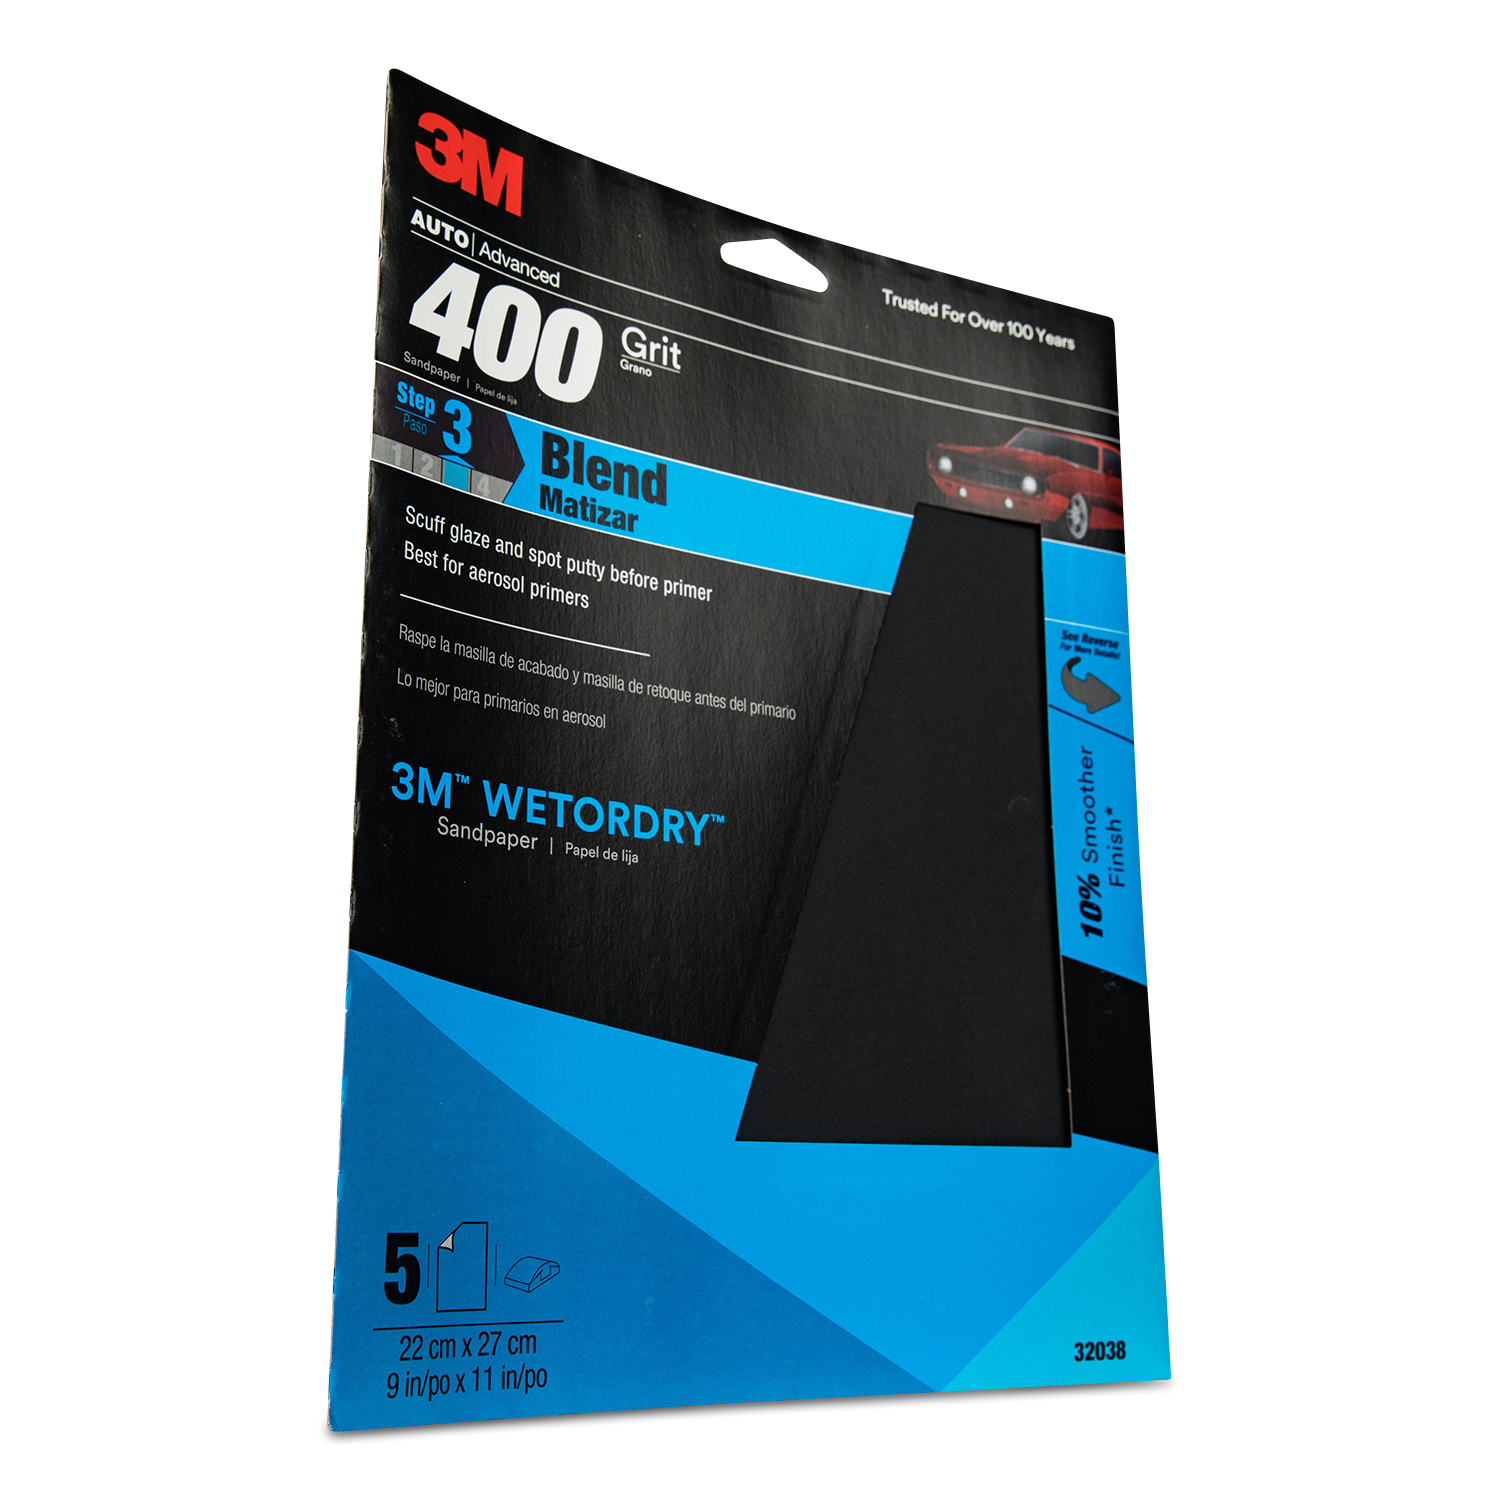 -02004  hs 5 NEW Sheets of 3M Wetordry Tri-M-ite 320A 9" x 11"